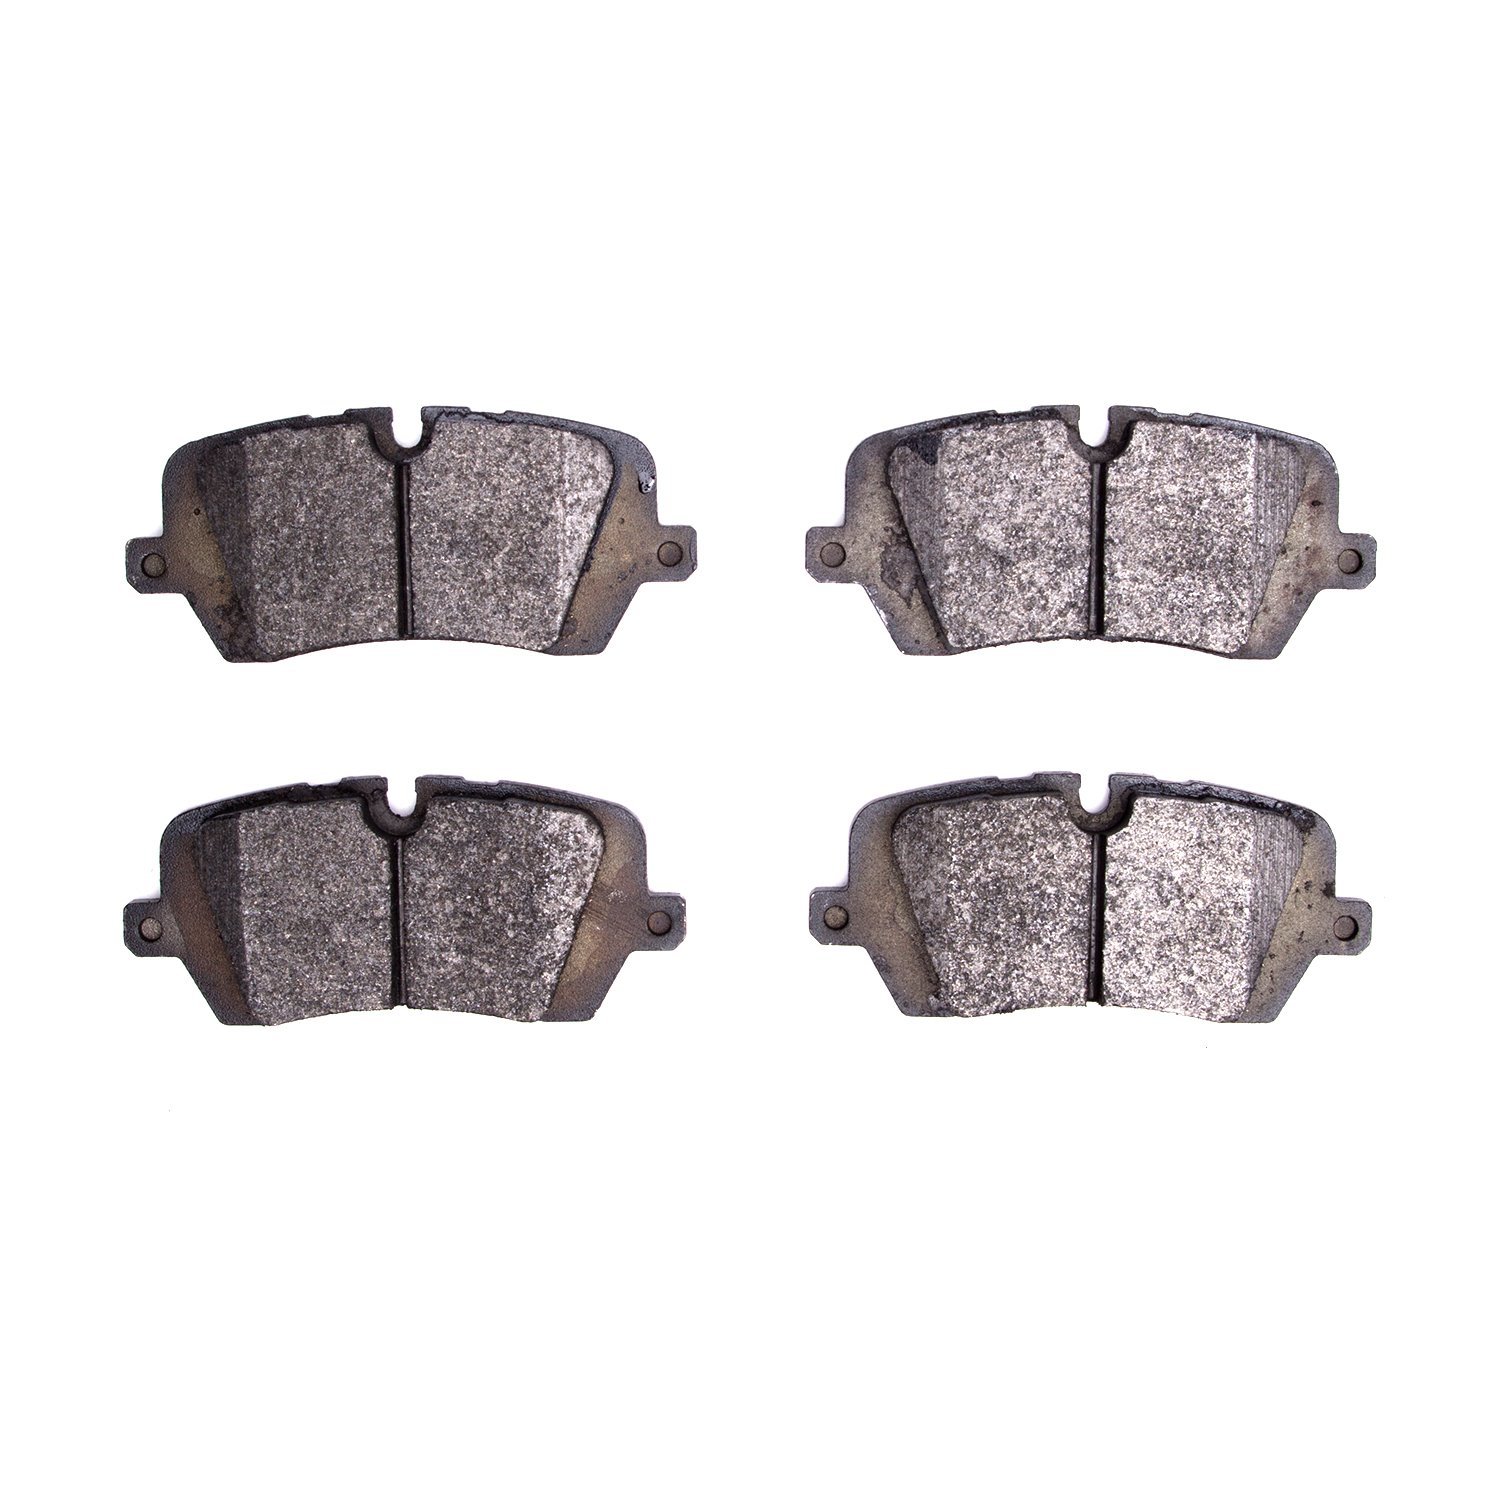 Optimum OE Brake Pads, Fits Select Land Rover, Position: Rear